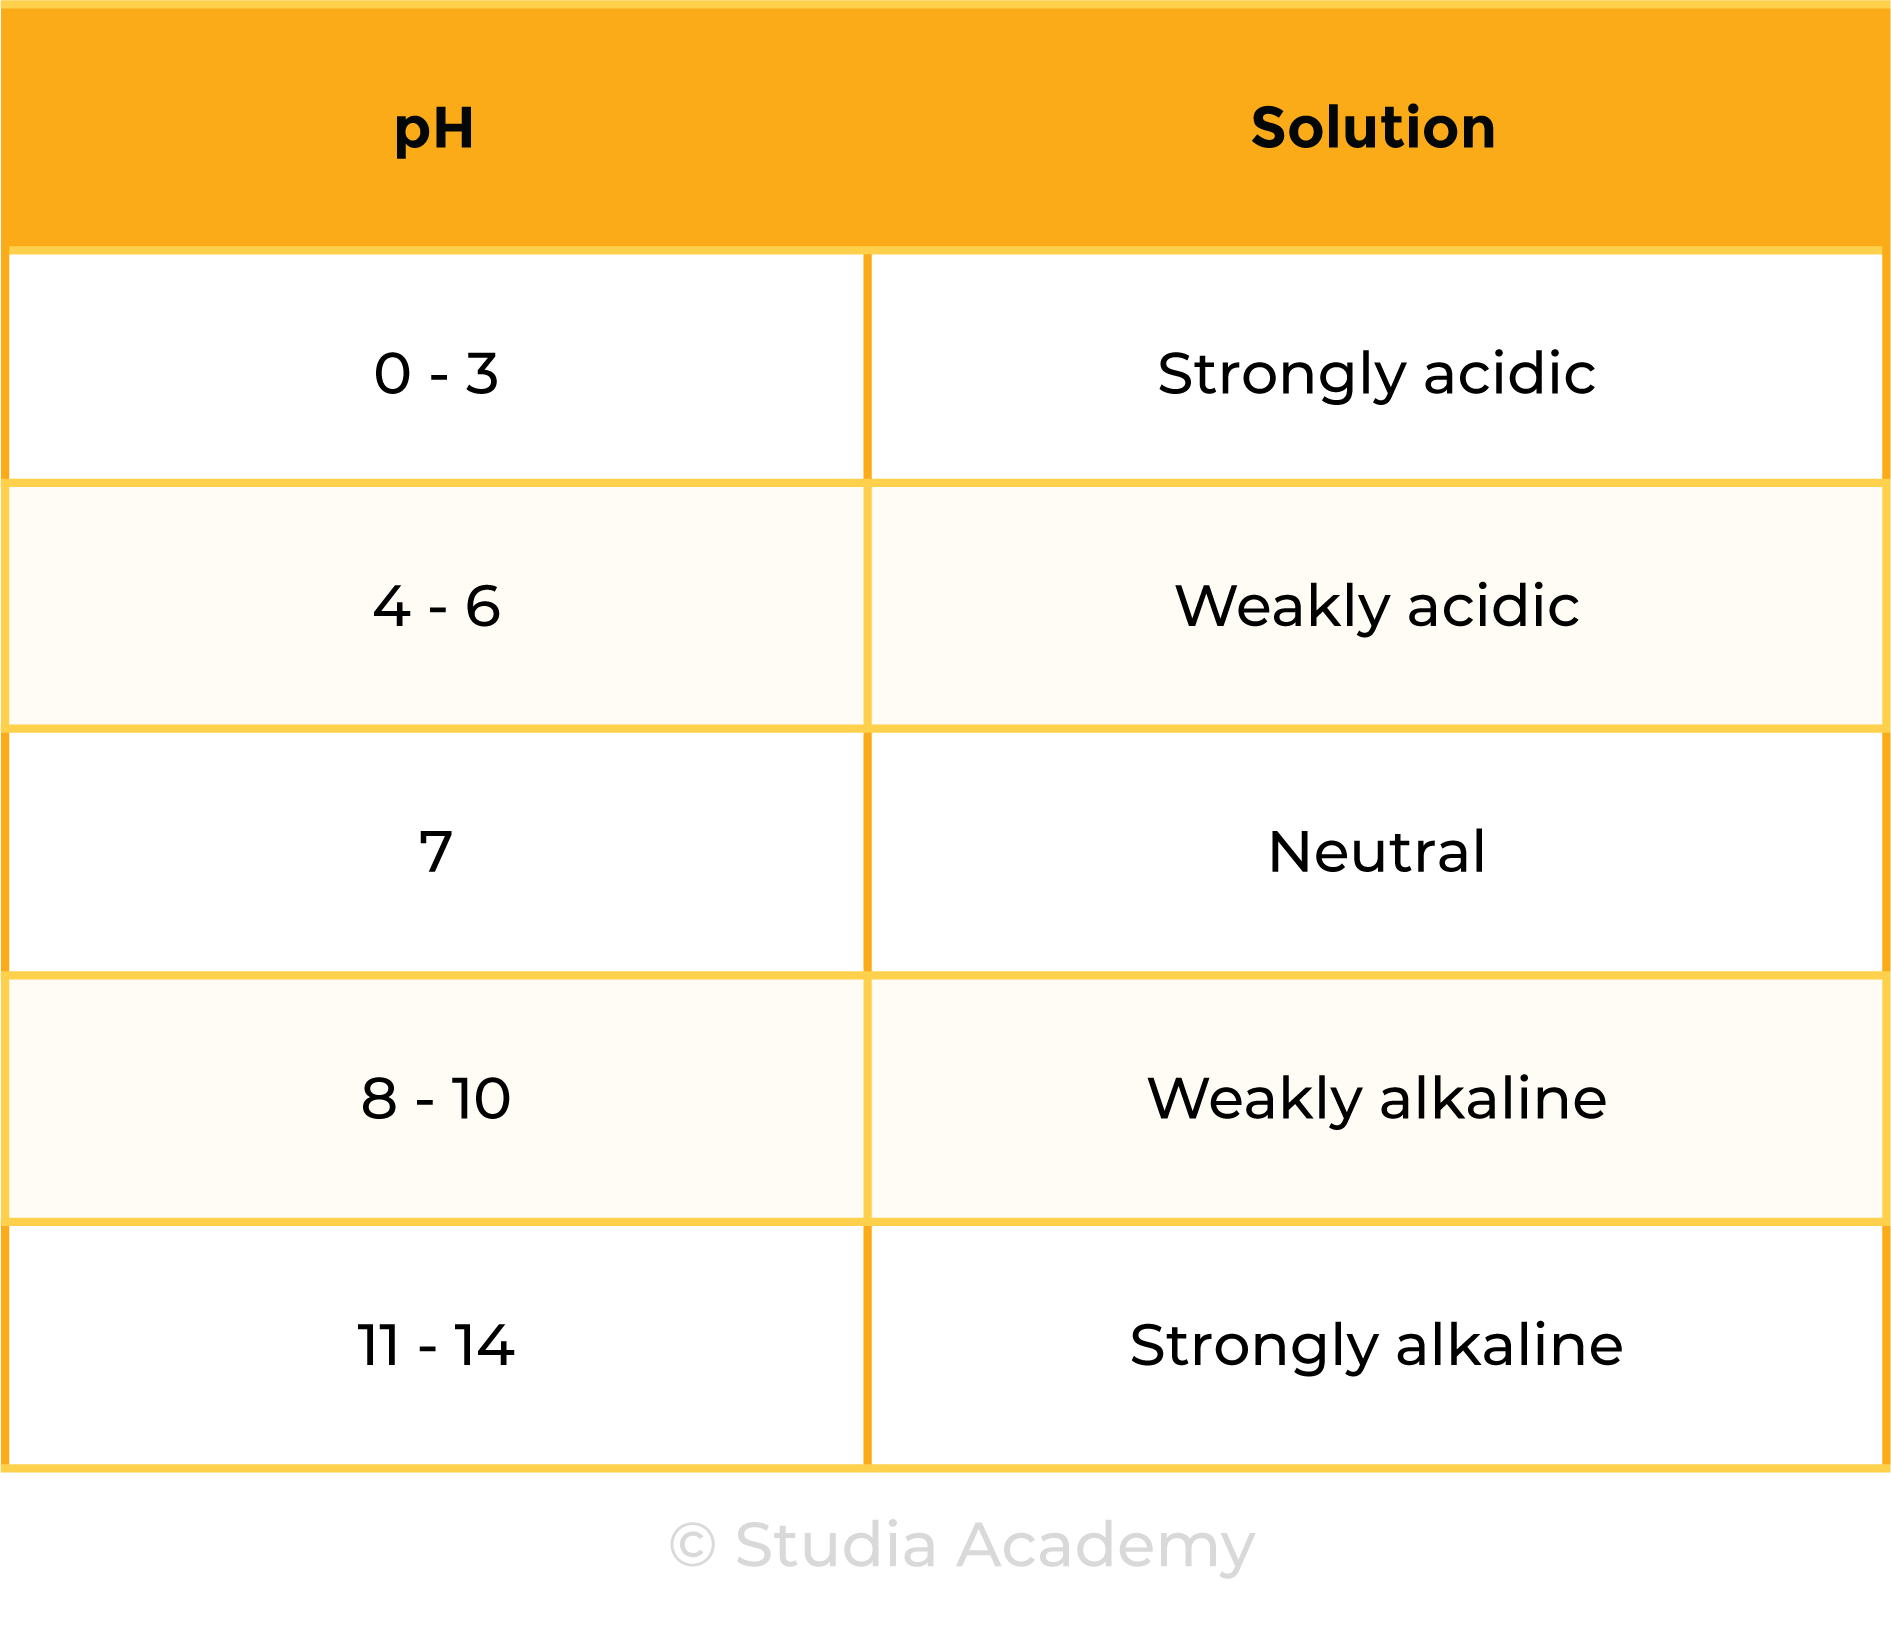 edexcel_igcse_chemistry_topic 15 tables_acids, alkalis, and titrations_002_ph scale and level of acidity or alkalinity